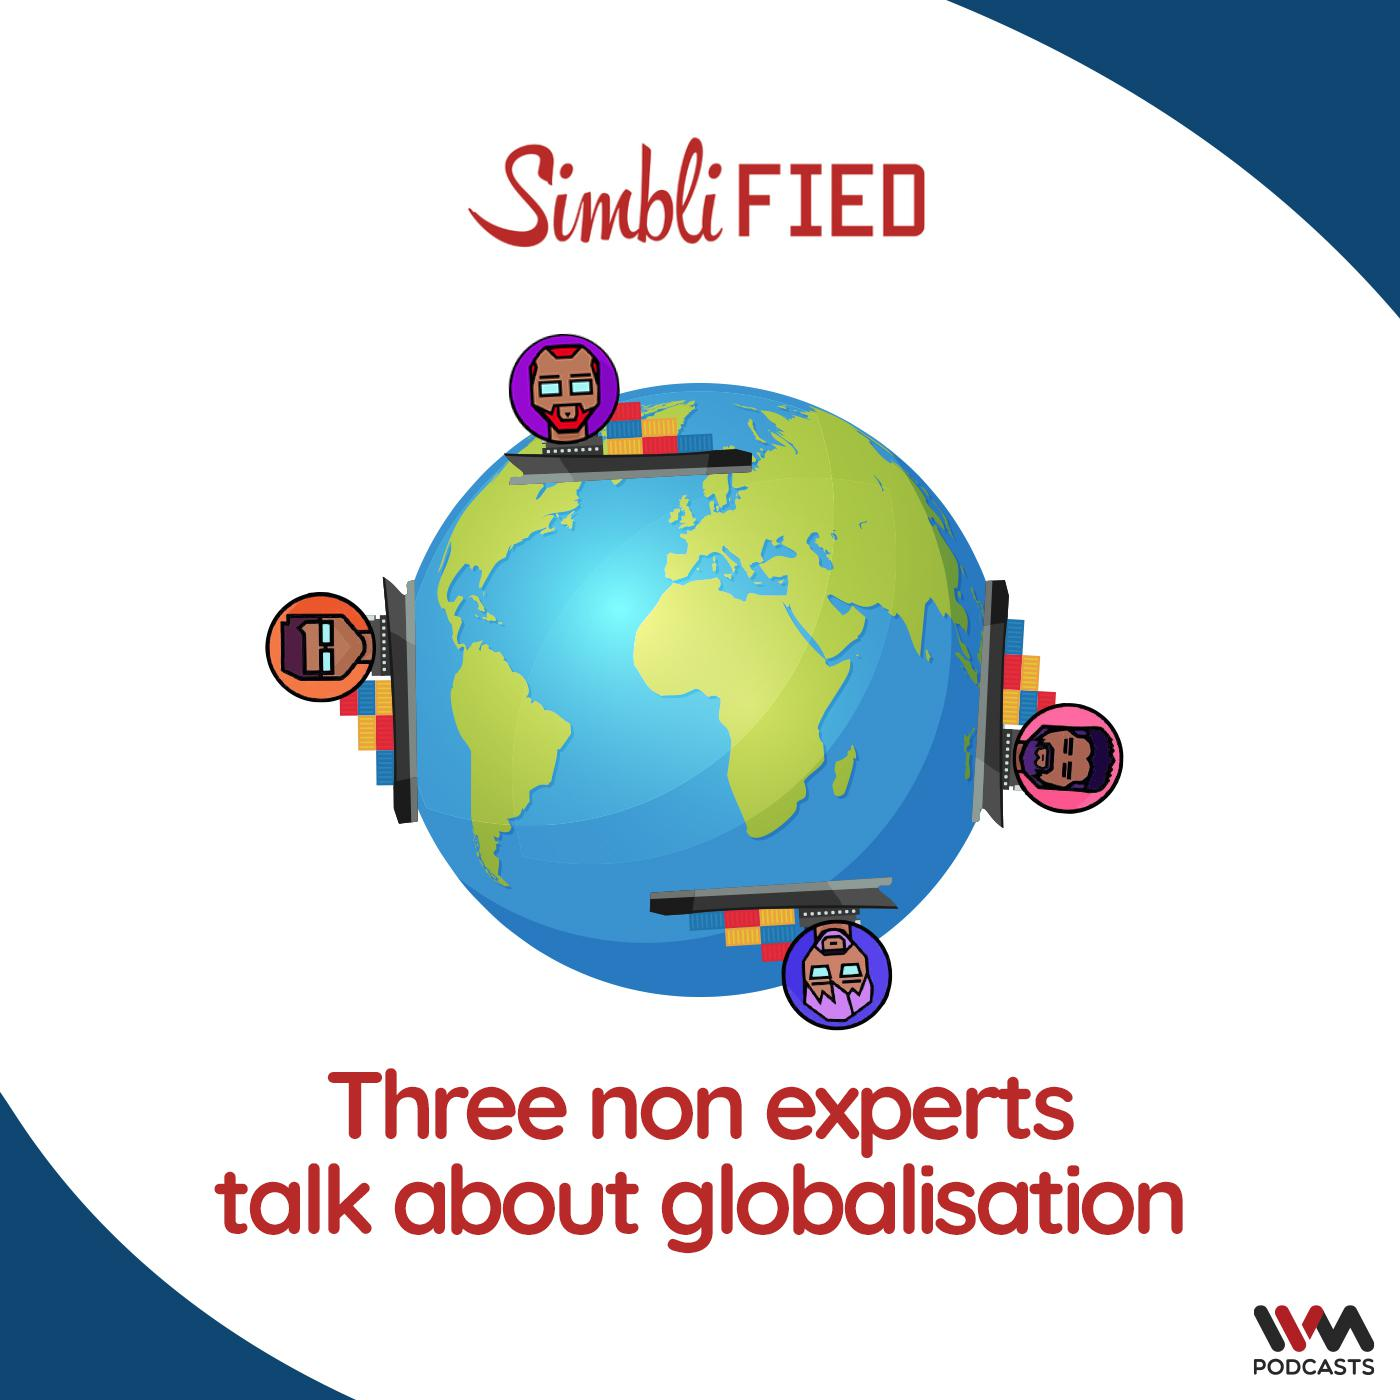 Three non experts talk about globalisation